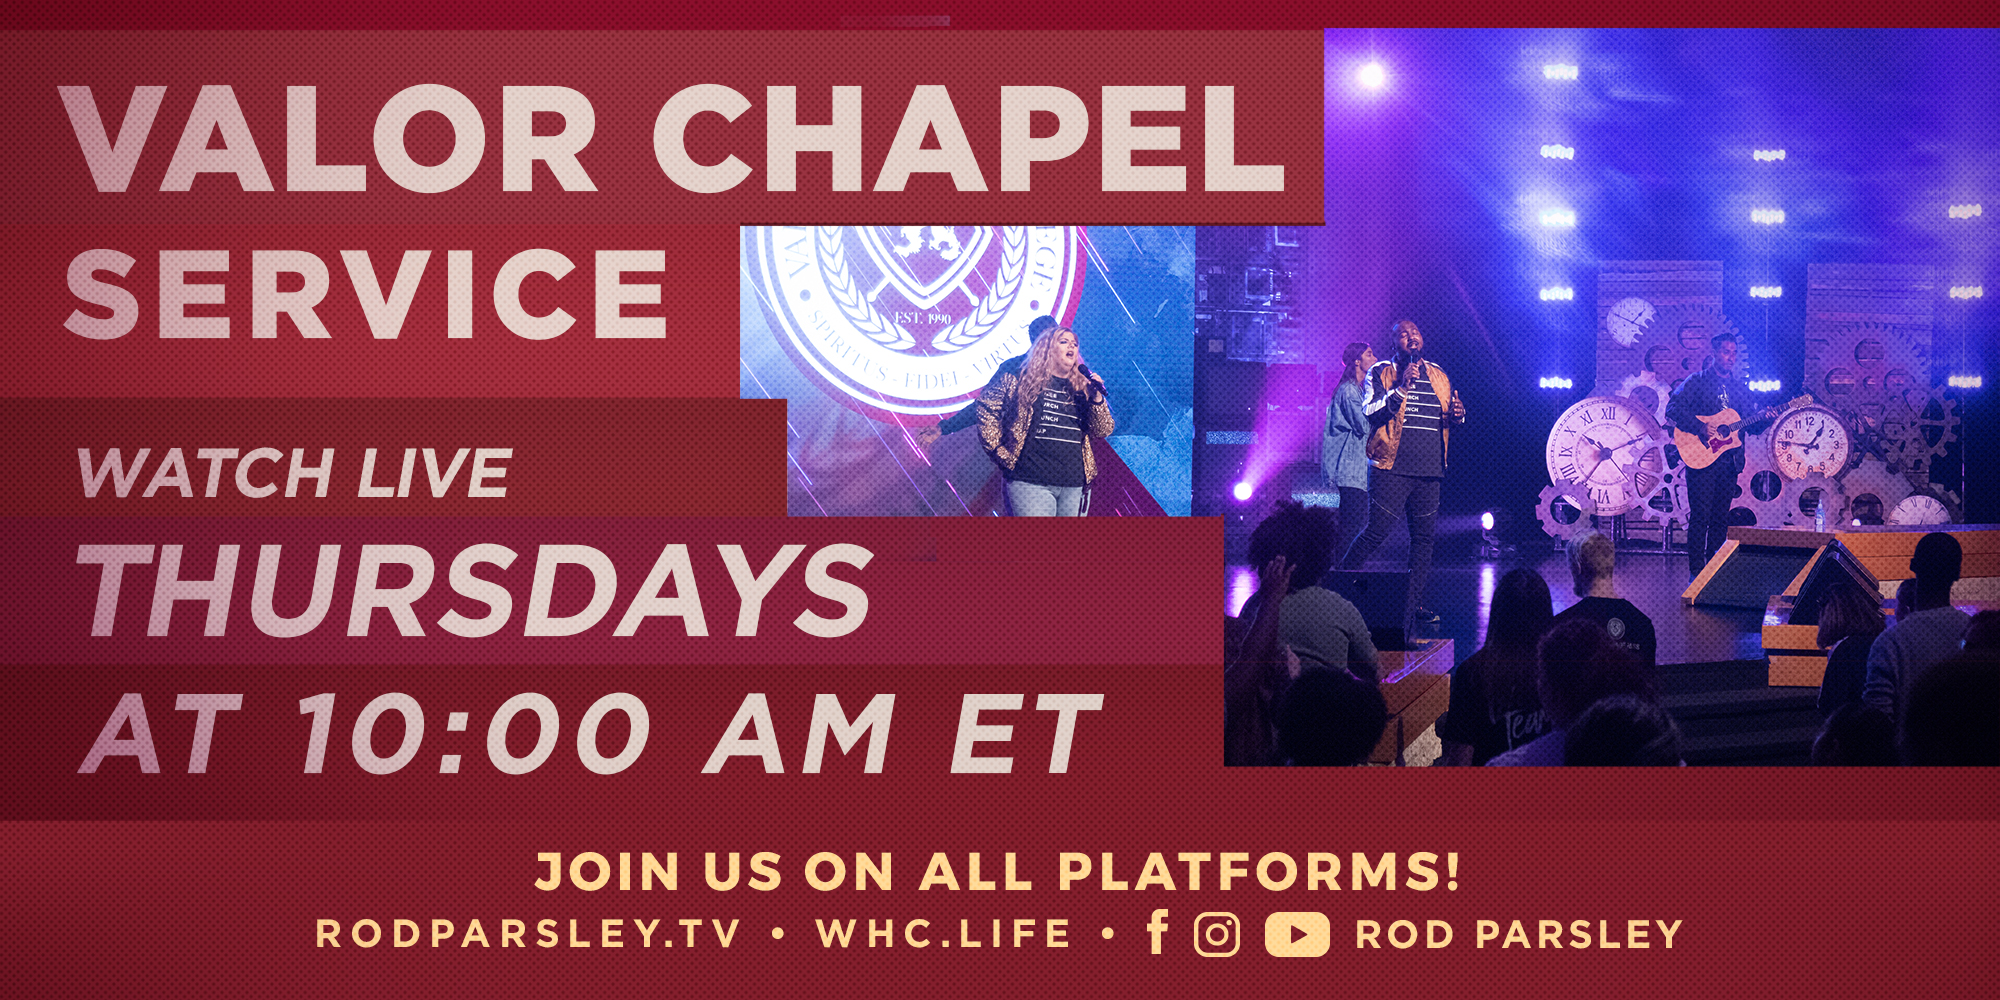 Valor Chapel Service Watch Live Thursdays at 10am Et Join Us on All Platforms! Rodparsley.Tv Whc.Life Facebook Instagram Youtube Rod Parsley